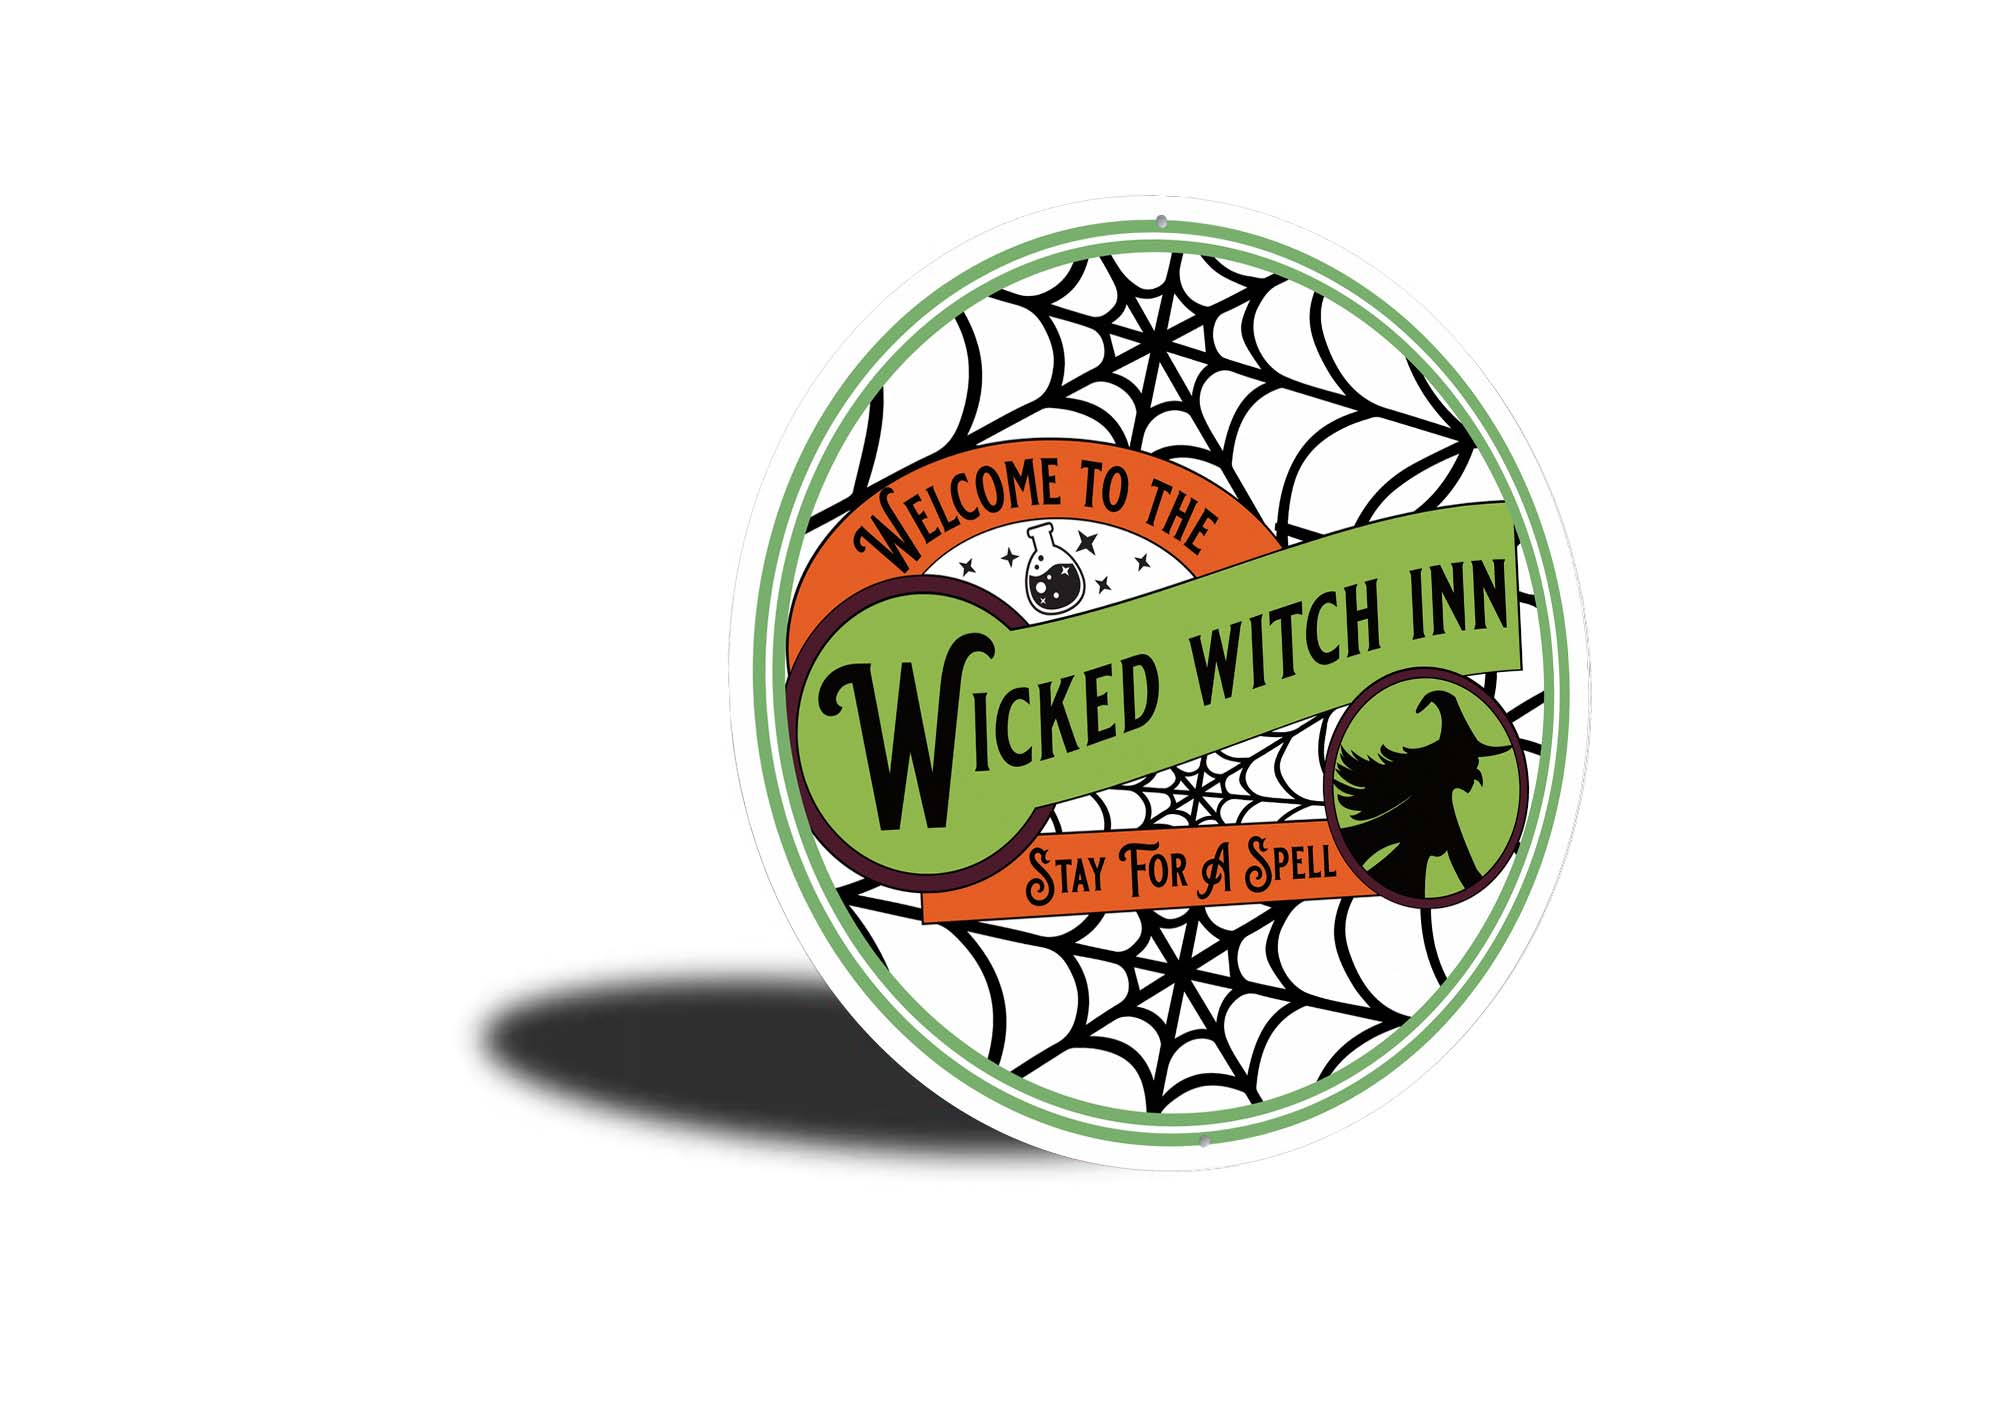 Wicked Witch Inn Spider Web Halloween Sign